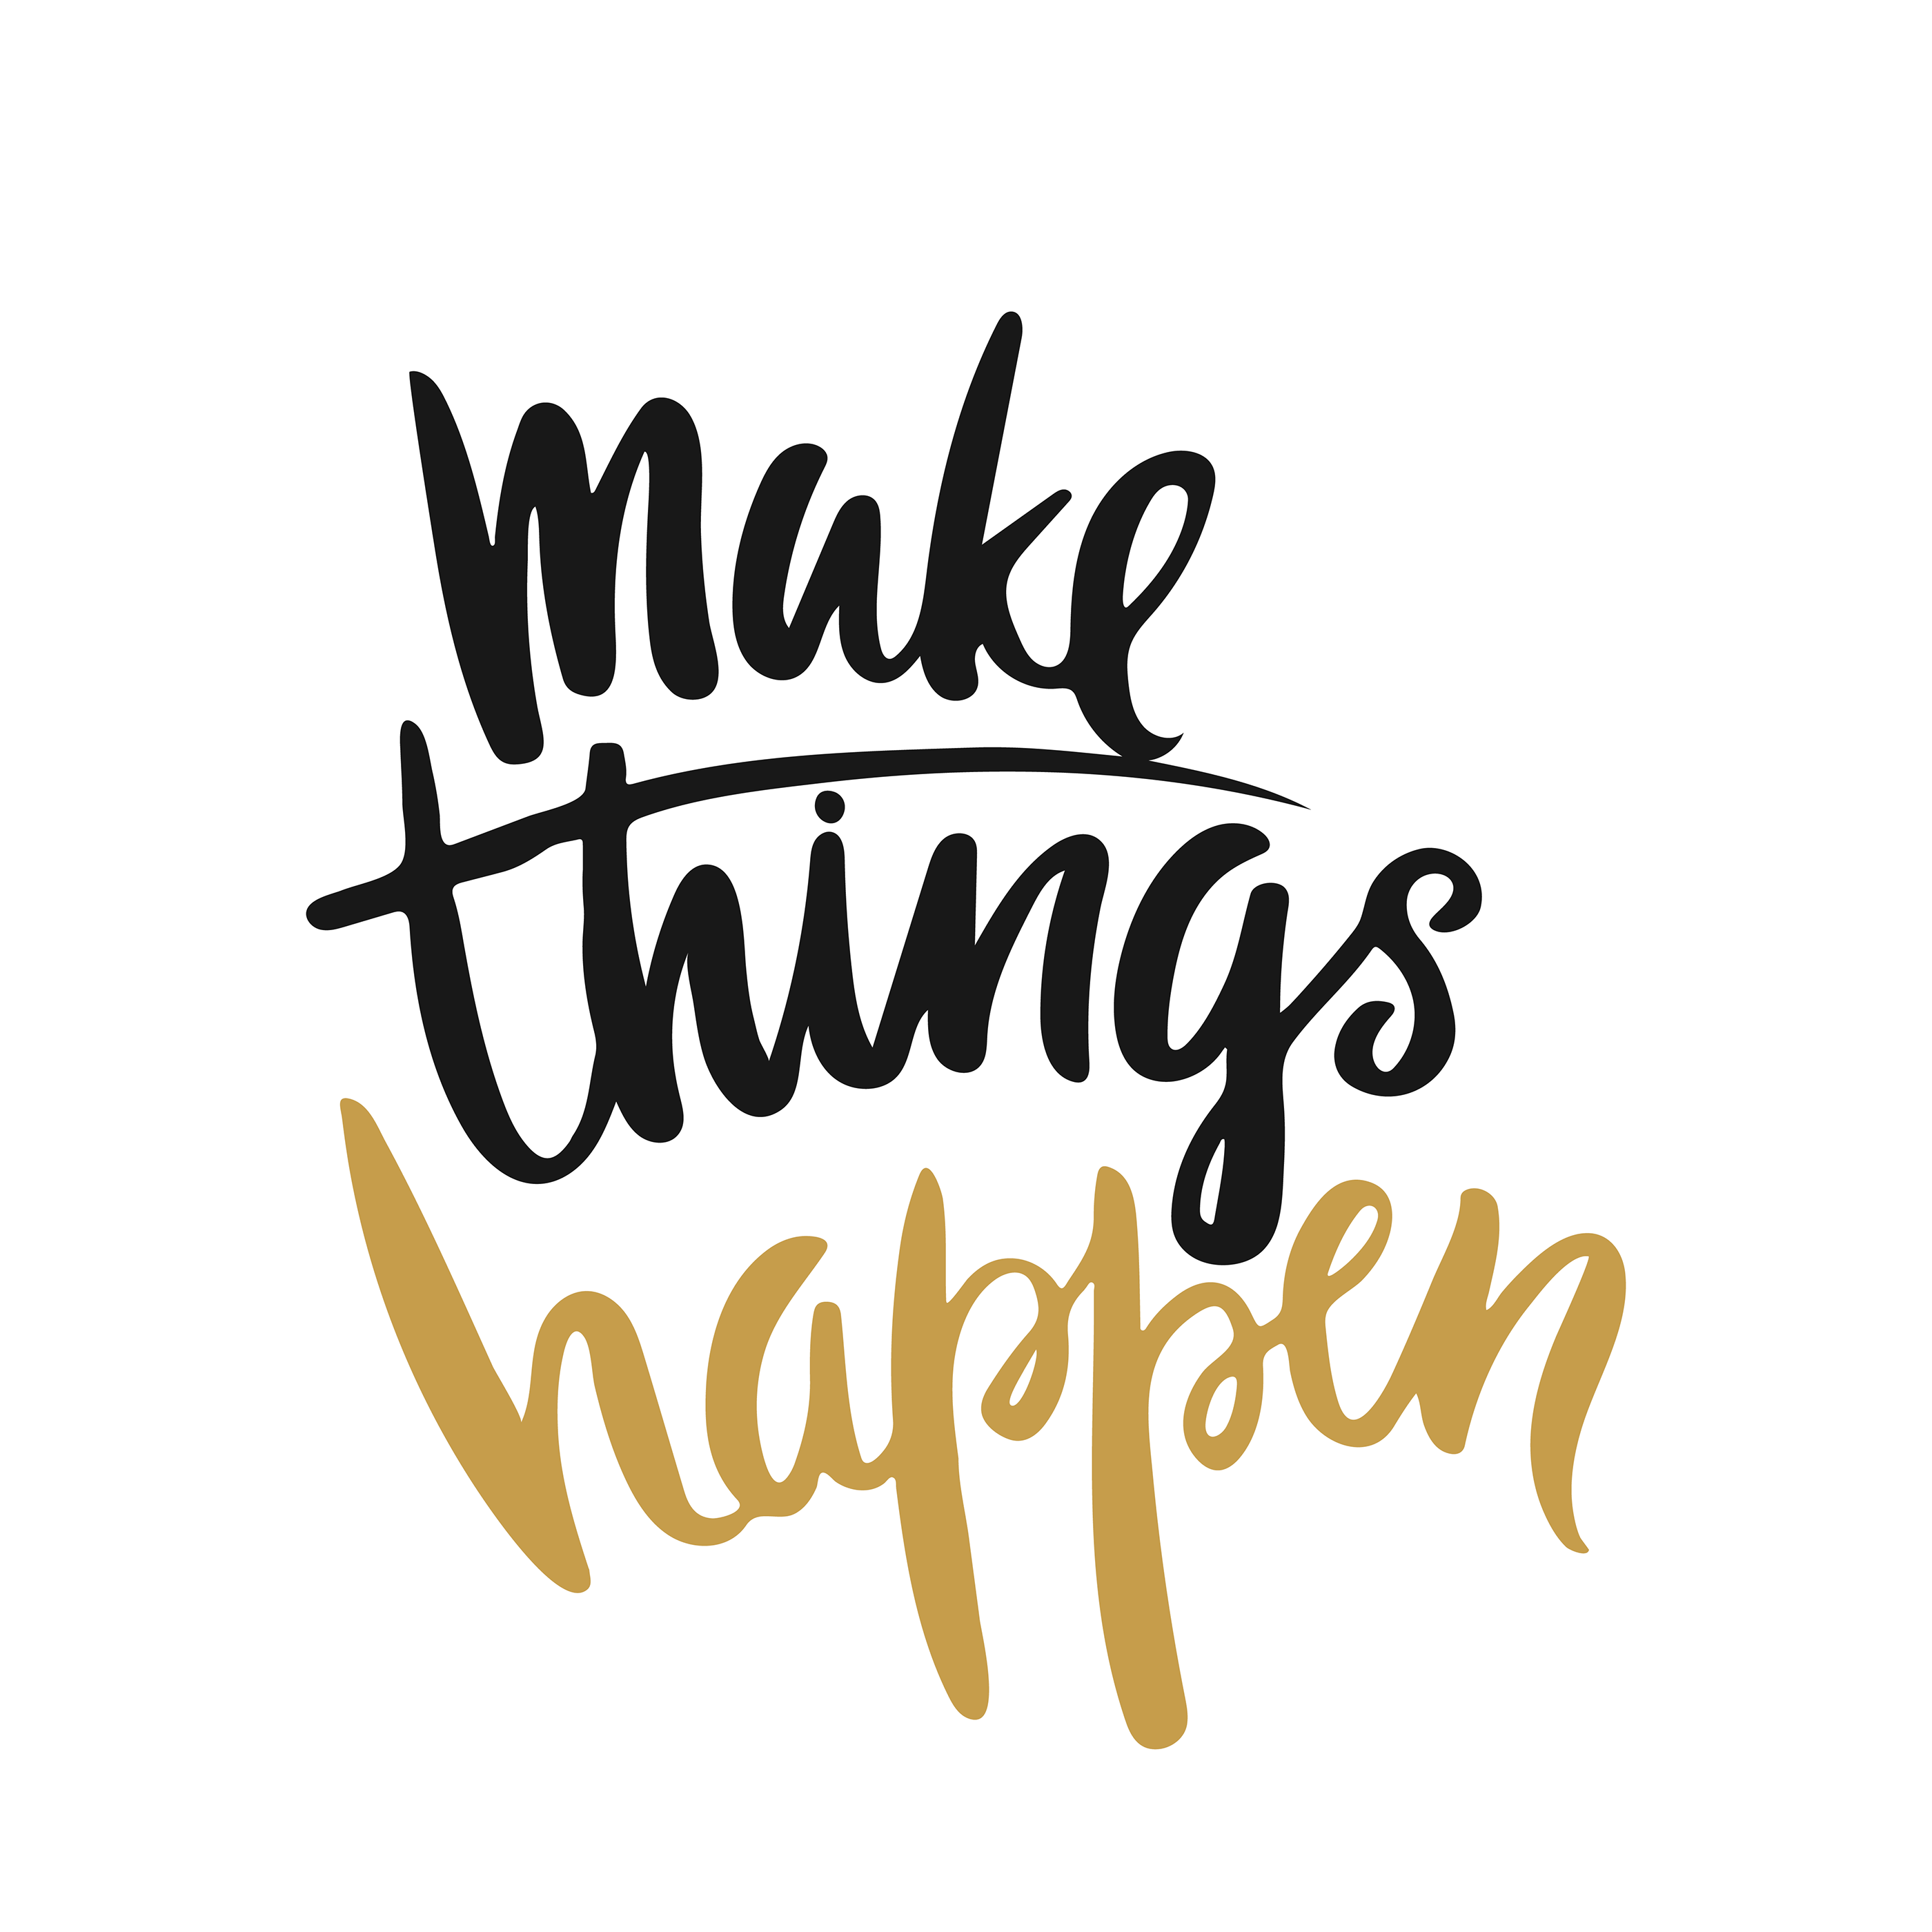 Make your happen. Things happen. Make things happen. Things happen обои. Lettering poster.